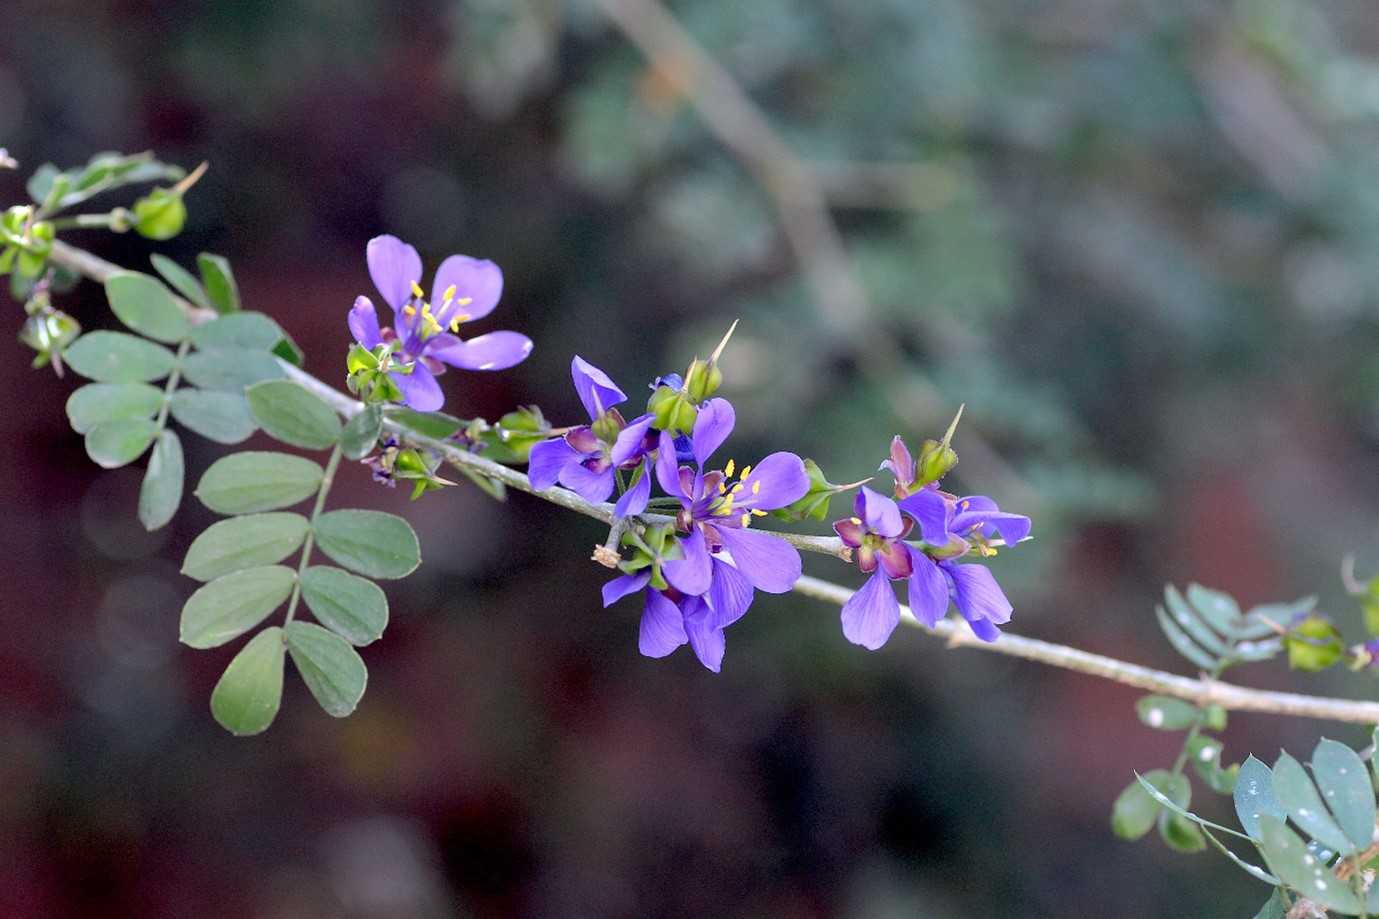 Several purple flowers on a branch with opposite pinnate leaves